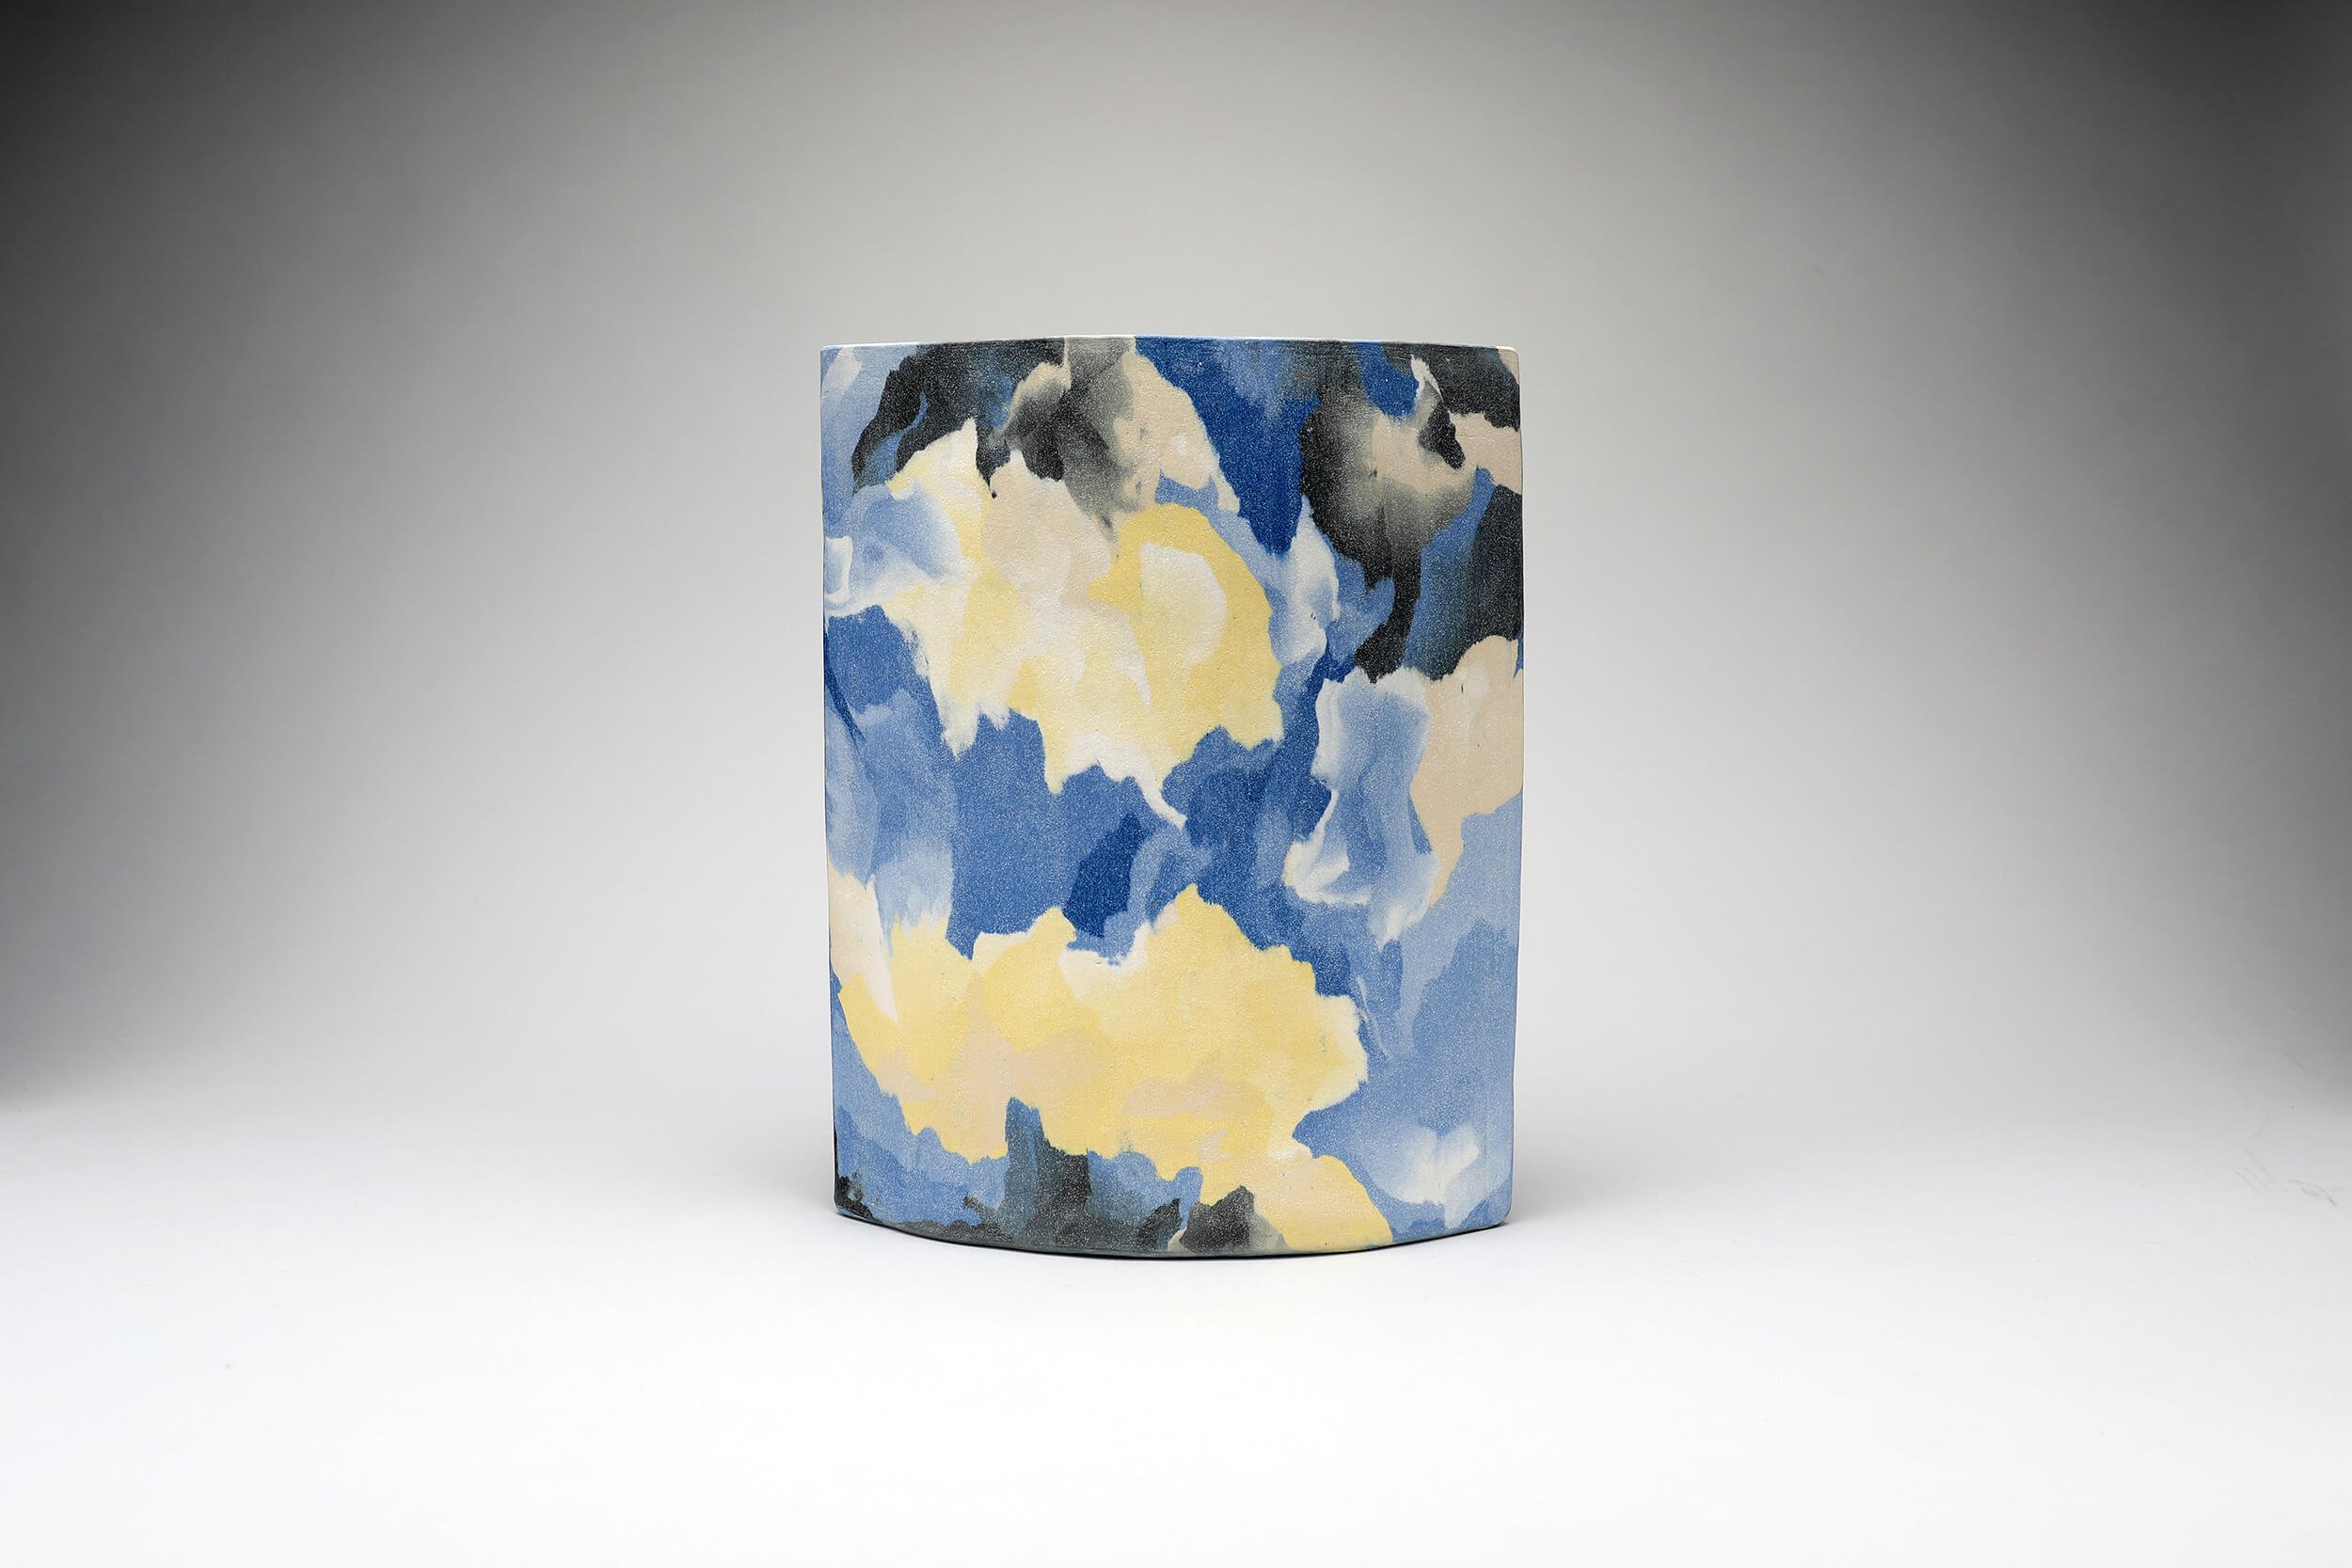 Large elliptical vase with yellow clouds